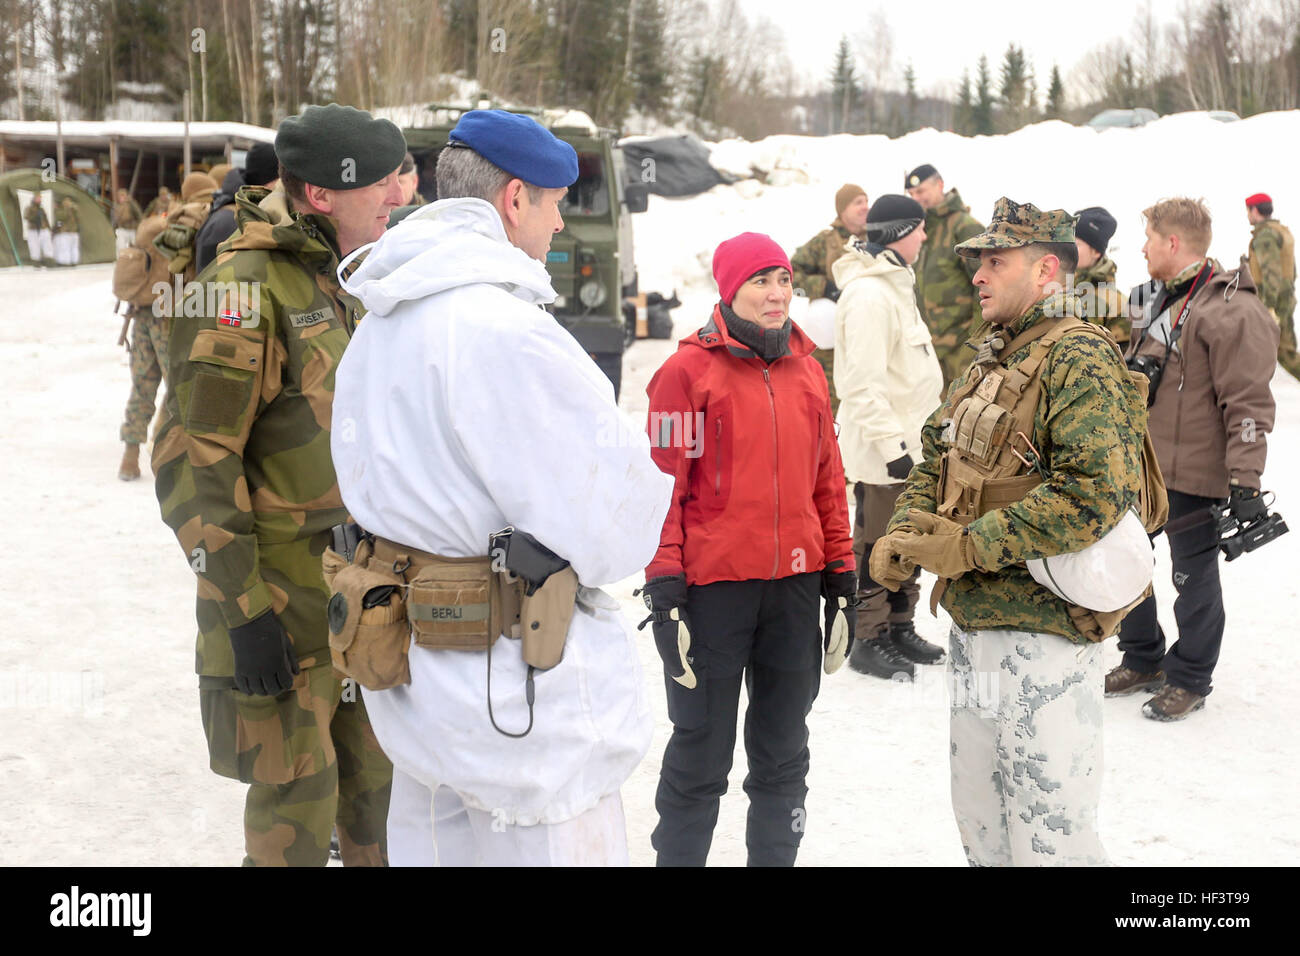 Norwegian Minister of Defense Ine Marie Eriksen Søreide talks with Lt. Col. Justin Ansel, the commanding officer of Task Force 1/8, and officers from Norway and Sweden at a training location near Steinkjer, Norway, March 2, 2016. Exercise Cold Response 16 is a multinational exercise combining the efforts of 13 NATO allies and partner nations and approximately 15,000 troops taking place across Norway. (U.S. Marine Corps photo by Cpl. Dalton A. Precht/released) Allied Strong E28093 Norwegian Minister of Defense visits Cold Response 16 forces 160302-M-WI309-024 Stock Photo